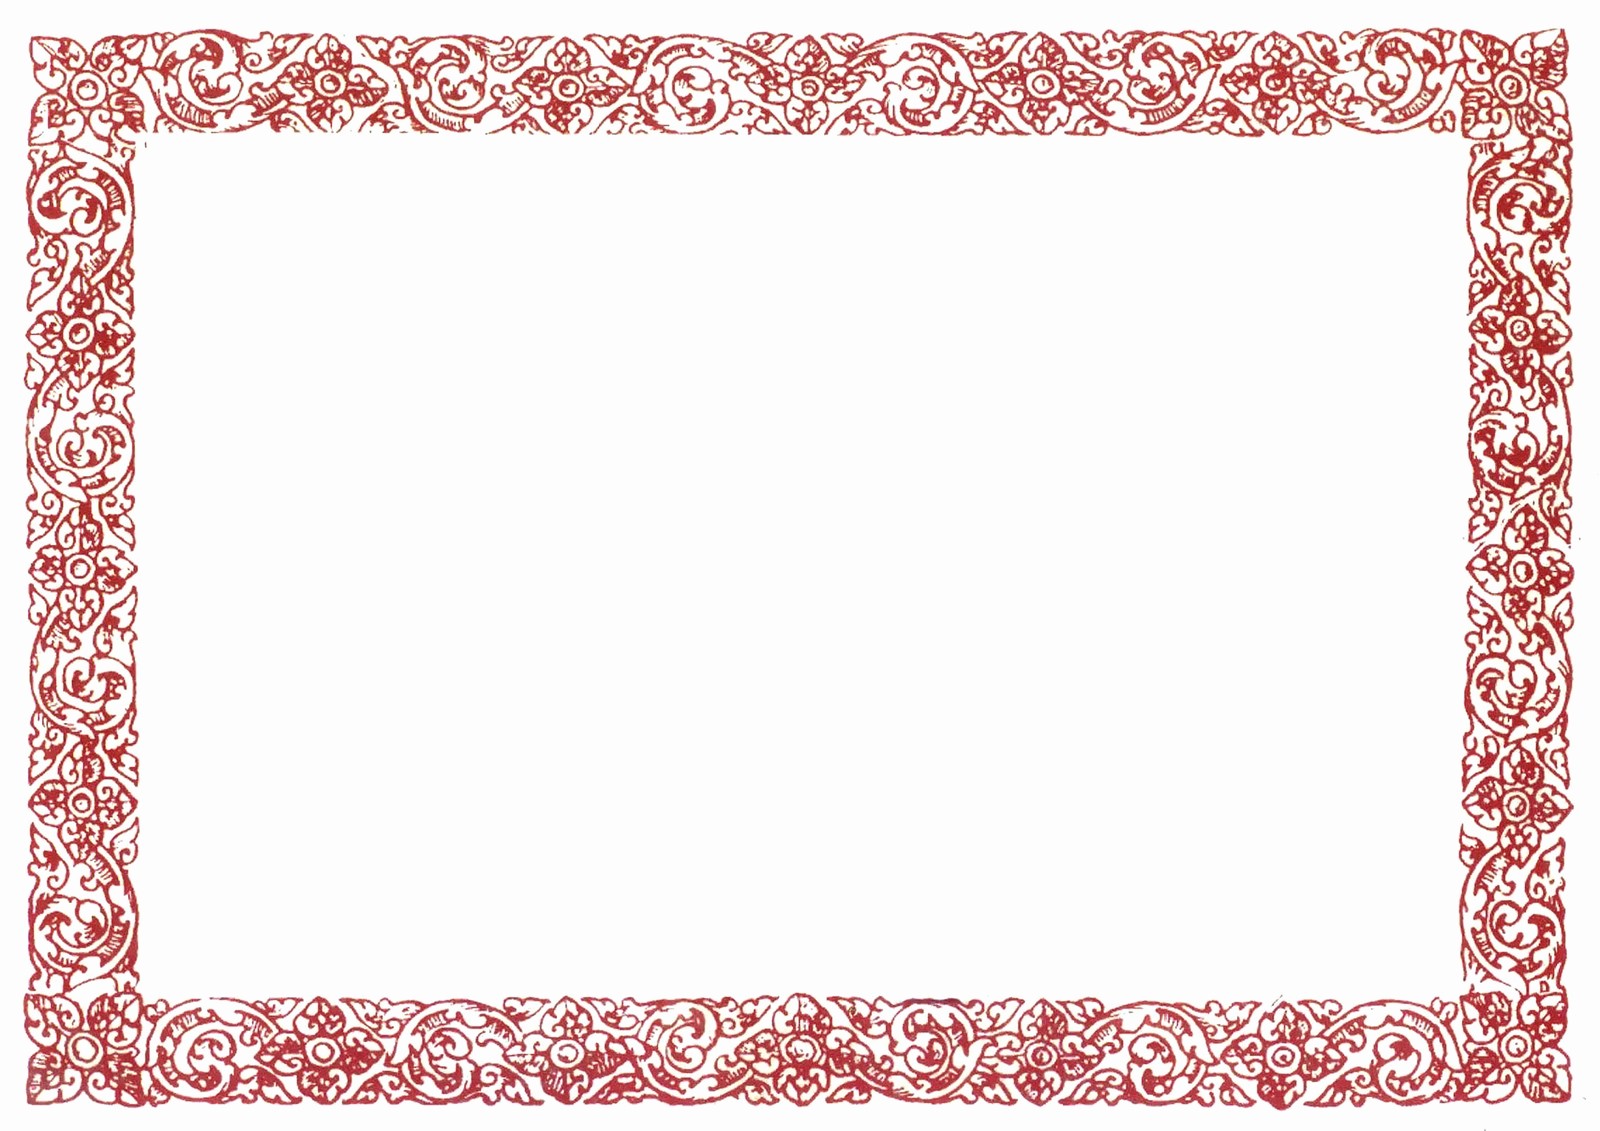 Certificate Border Design Free Download Lovely Red Border Certificate Templates